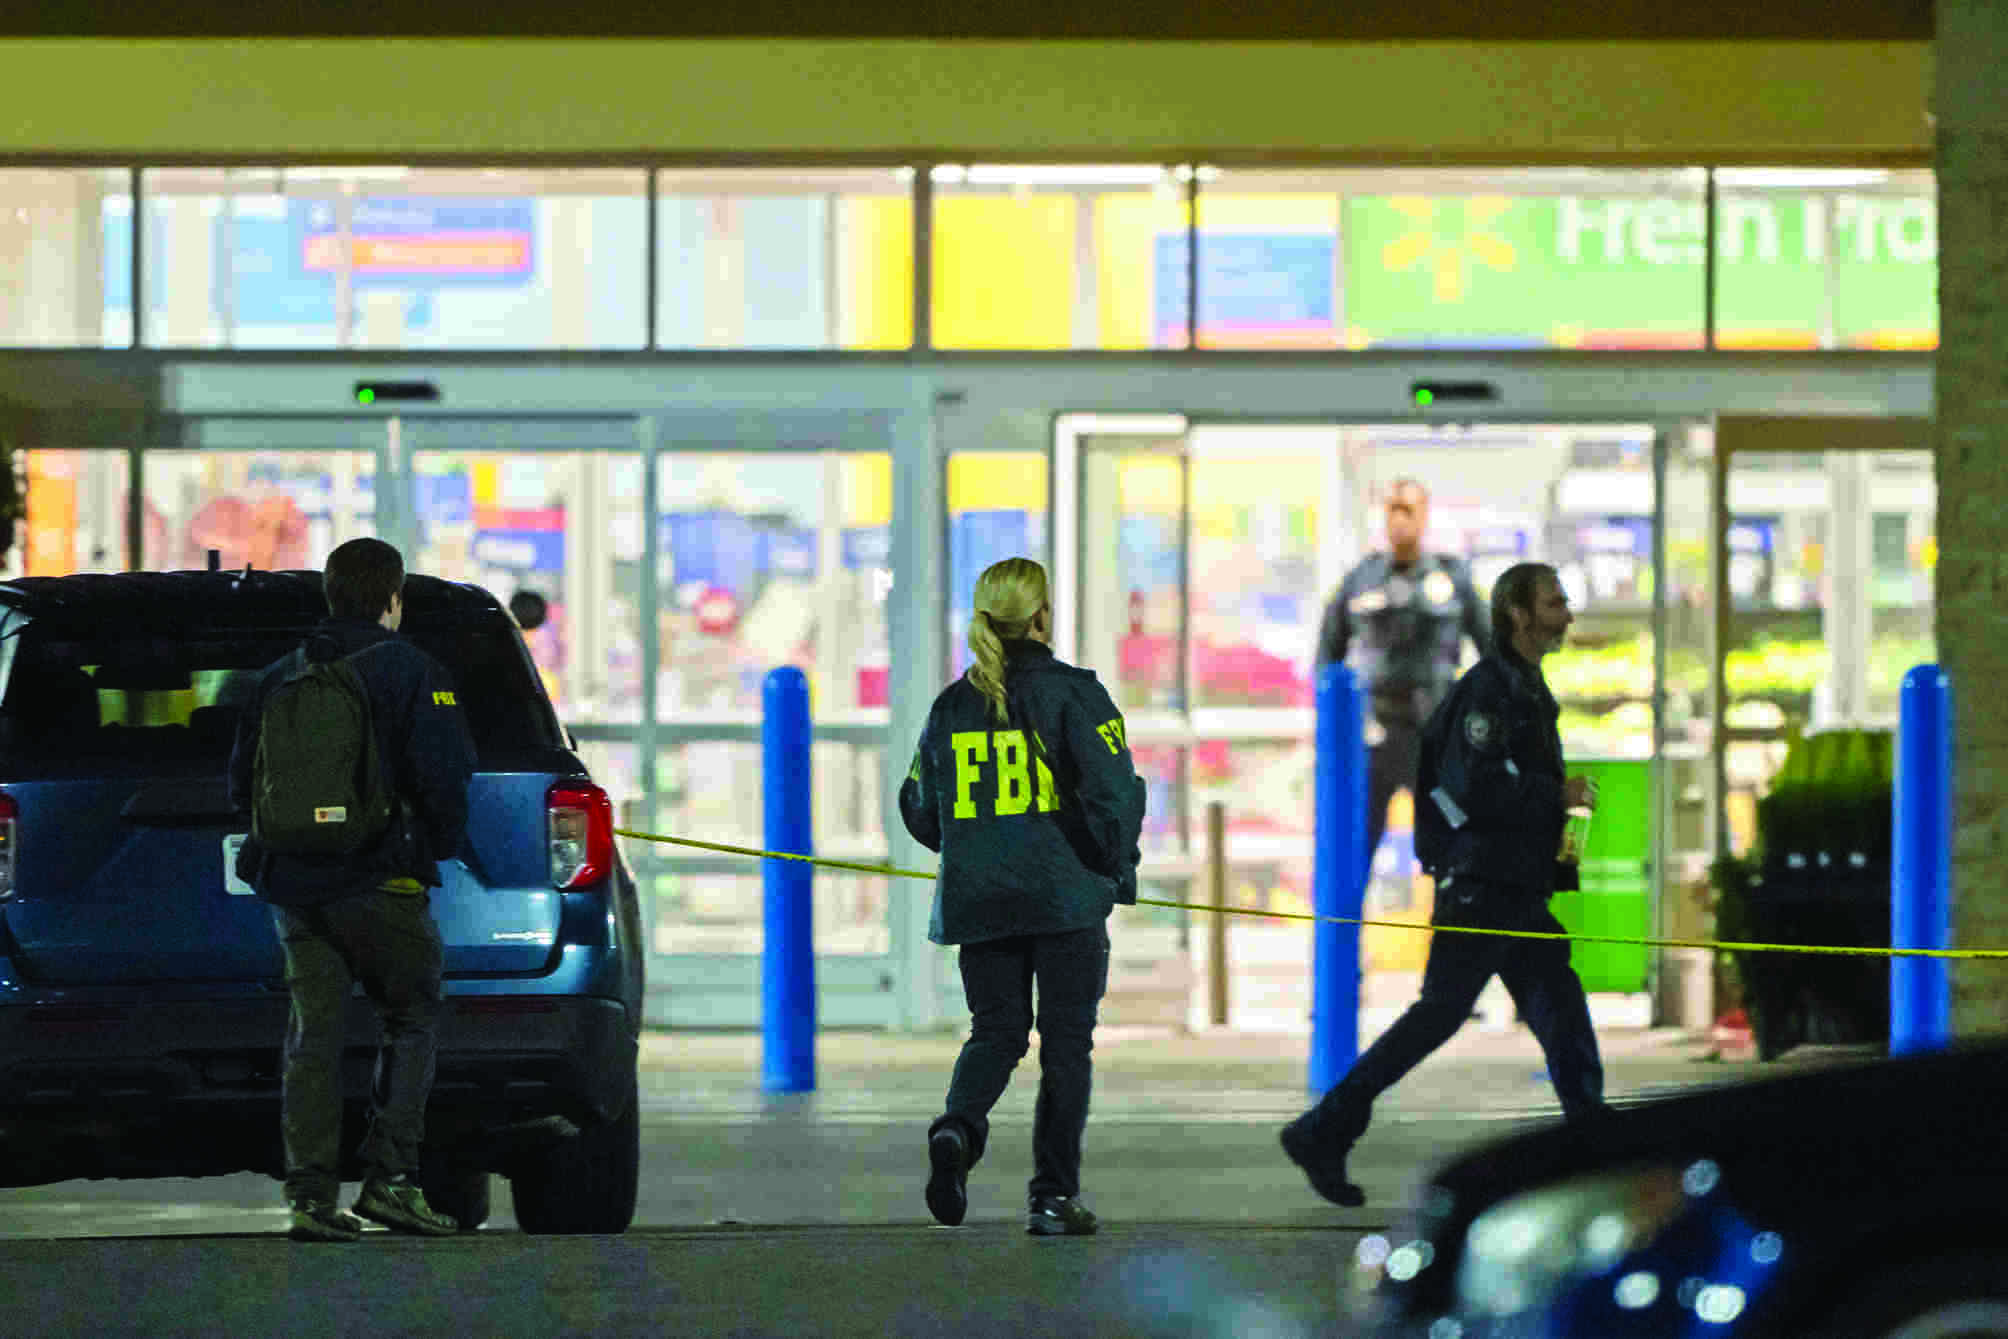 Six people and assailant killed at Walmart: Police